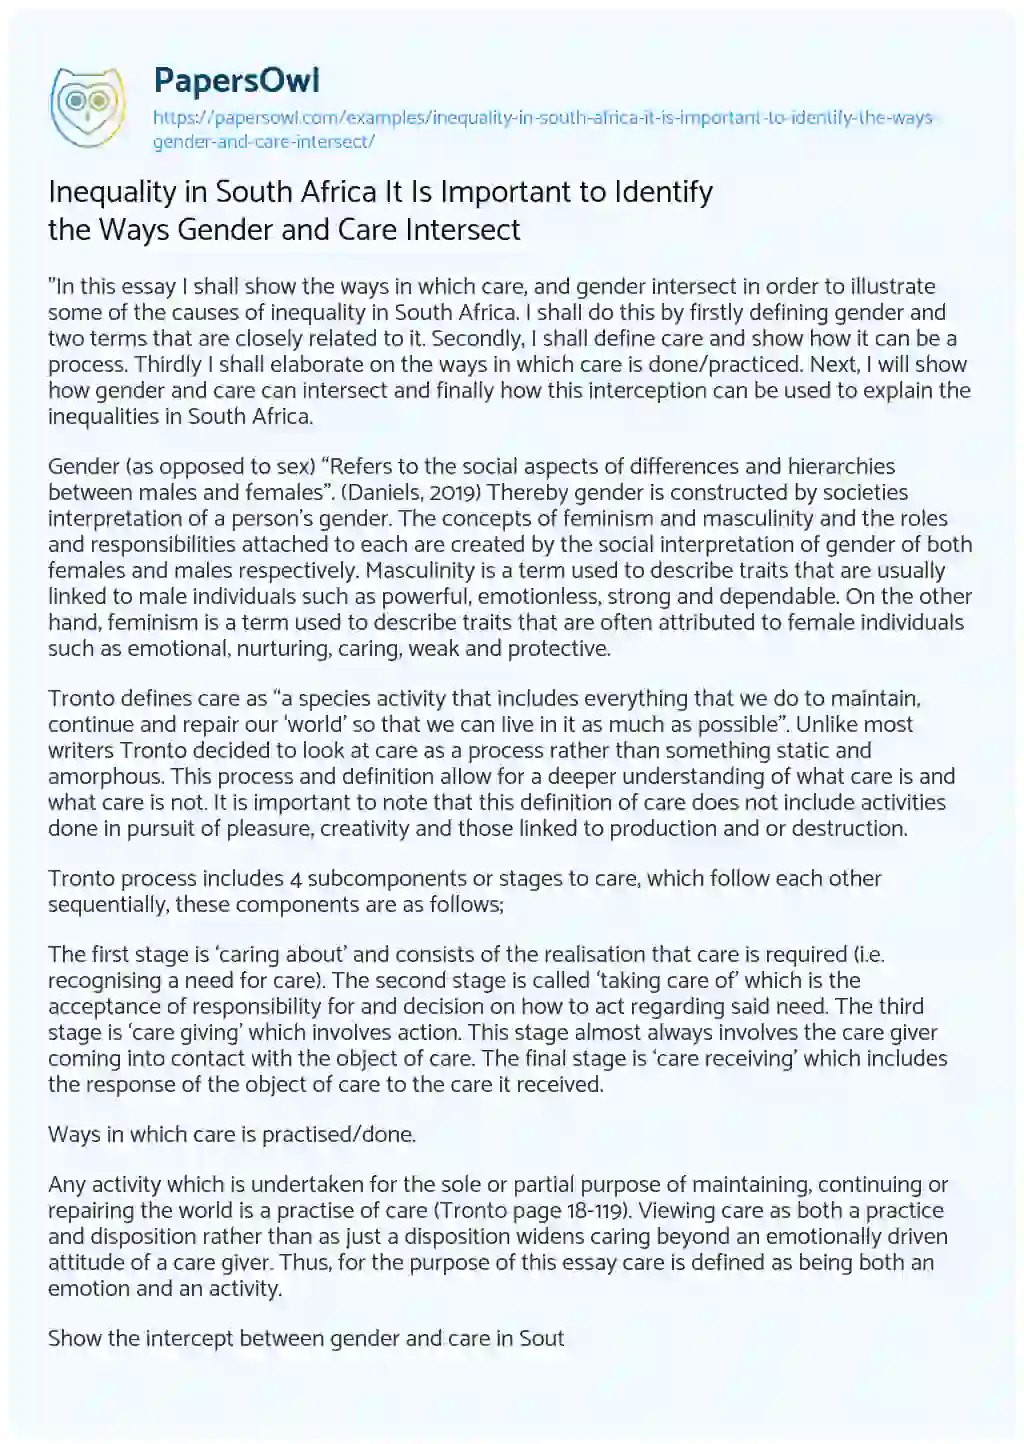 Essay on Inequality in South Africa it is Important to Identify the Ways Gender and Care Intersect